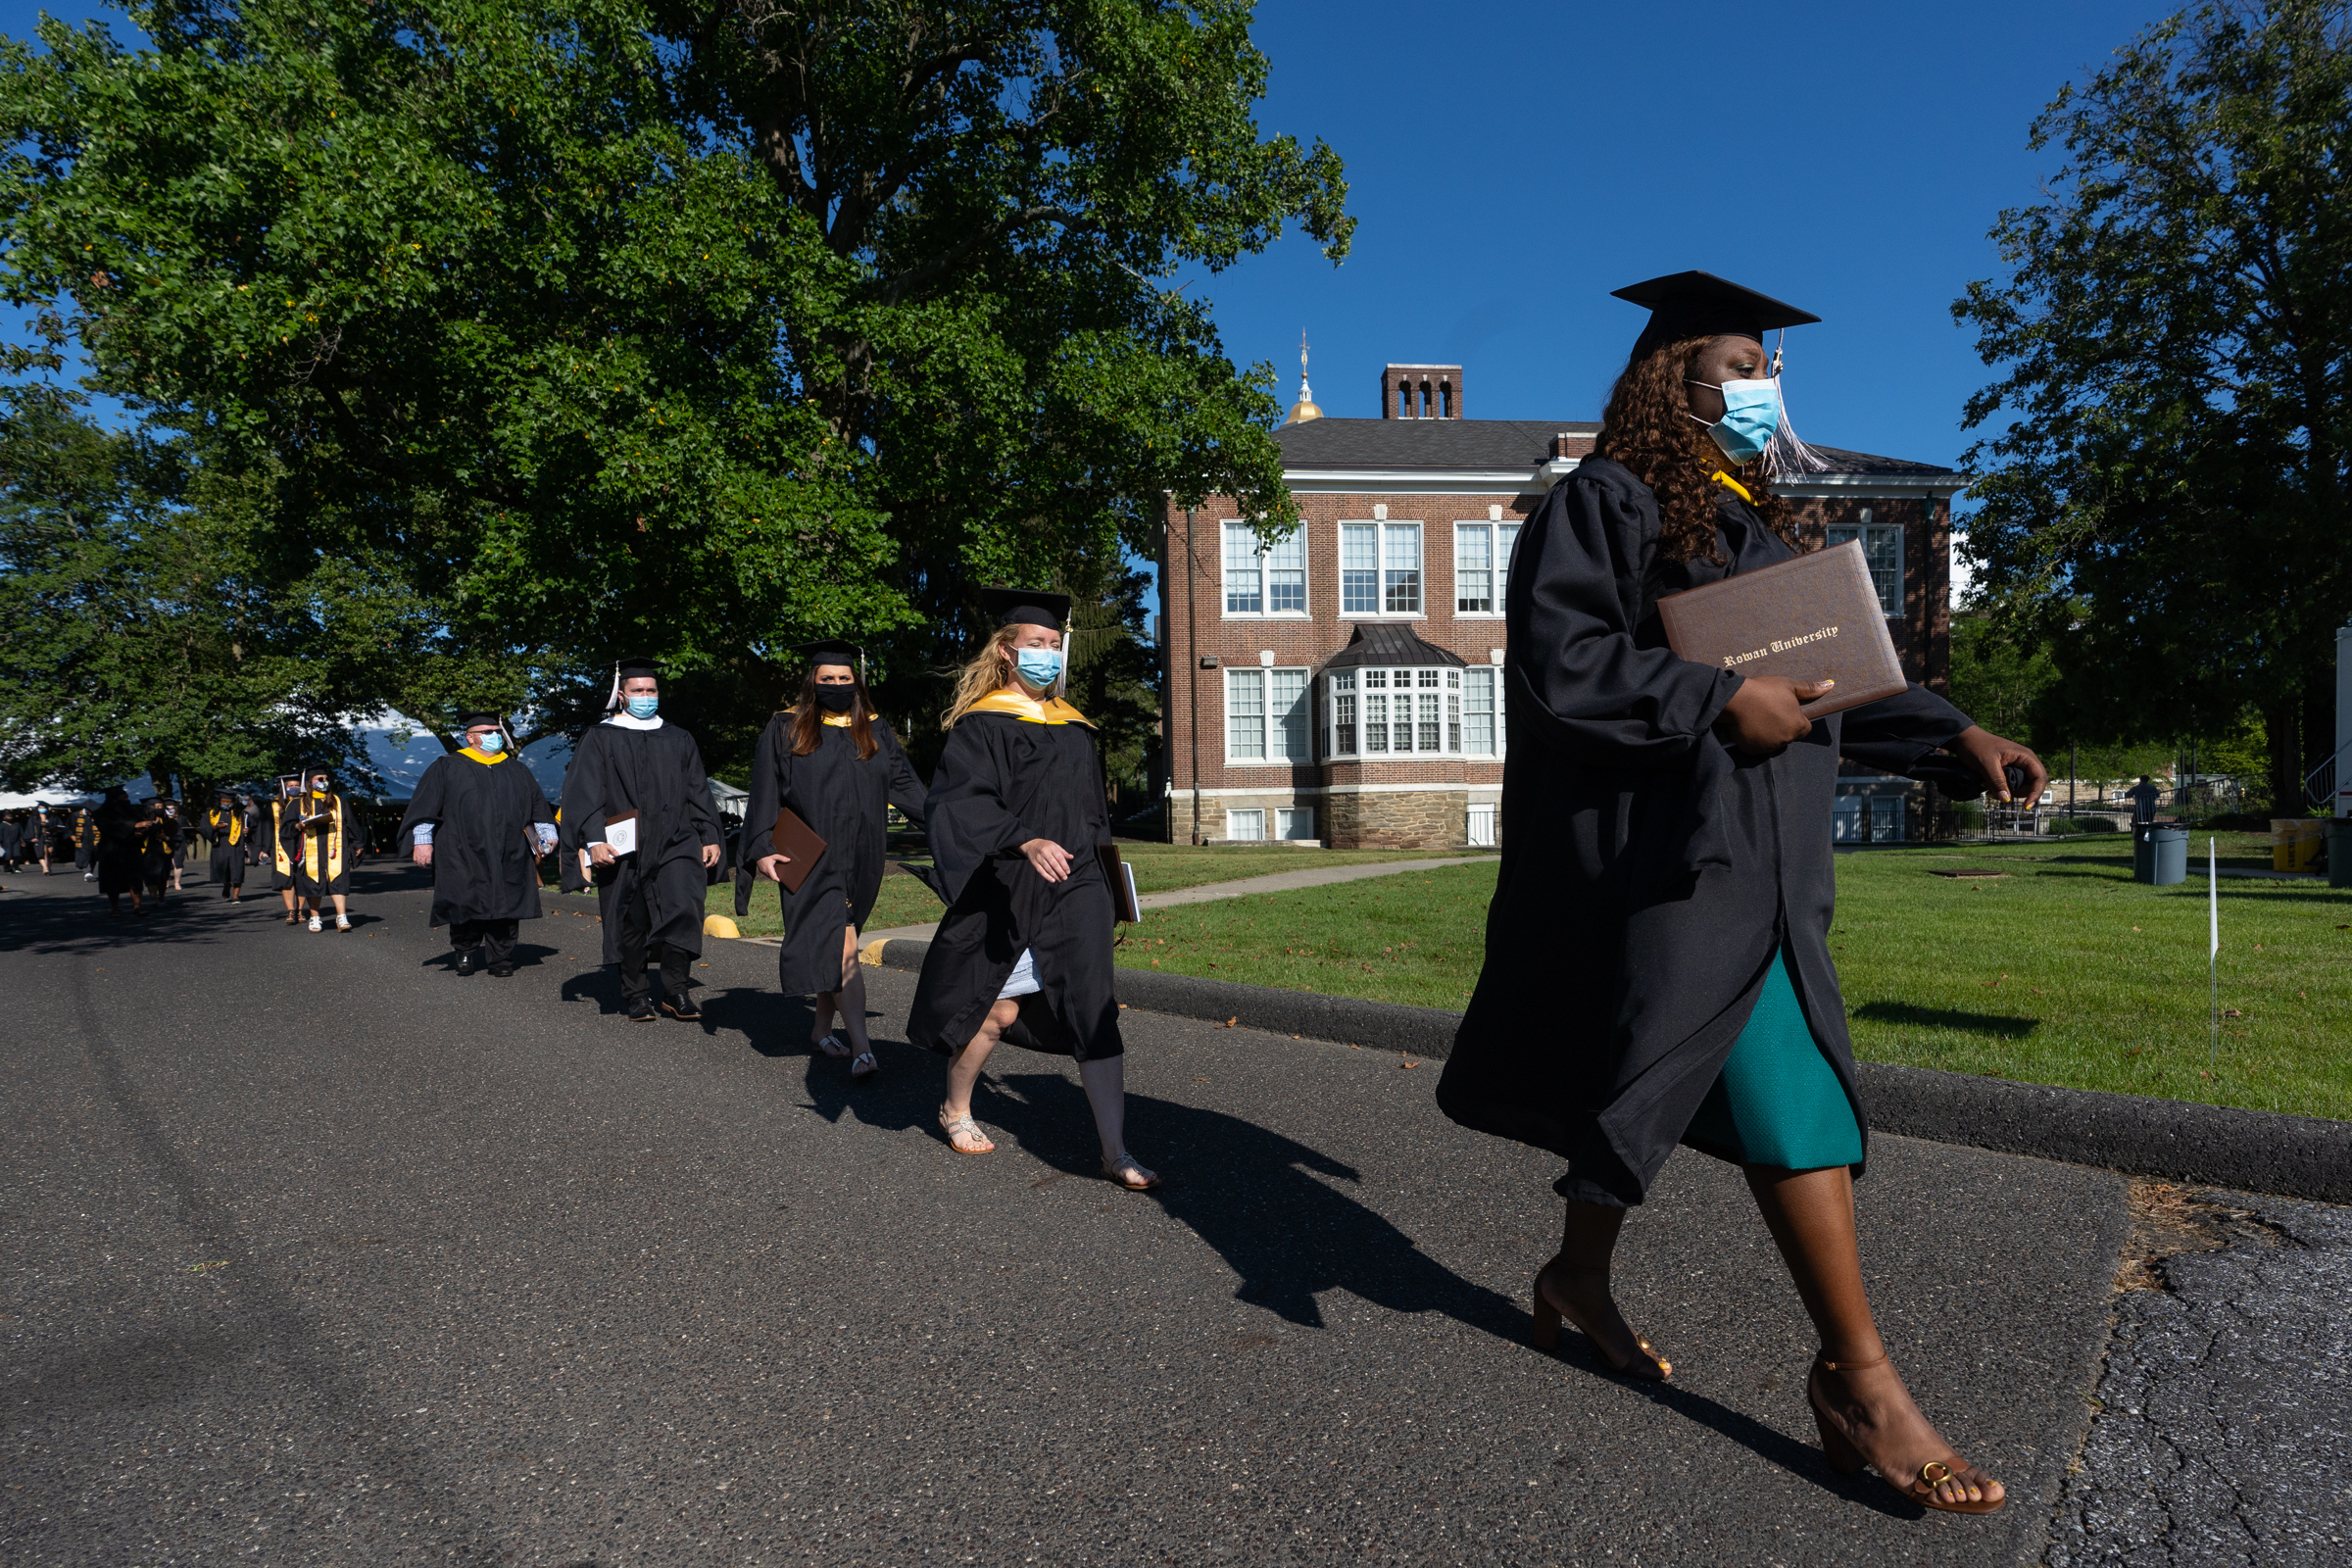 Rowan University is among first in the region to hold in-person commencement